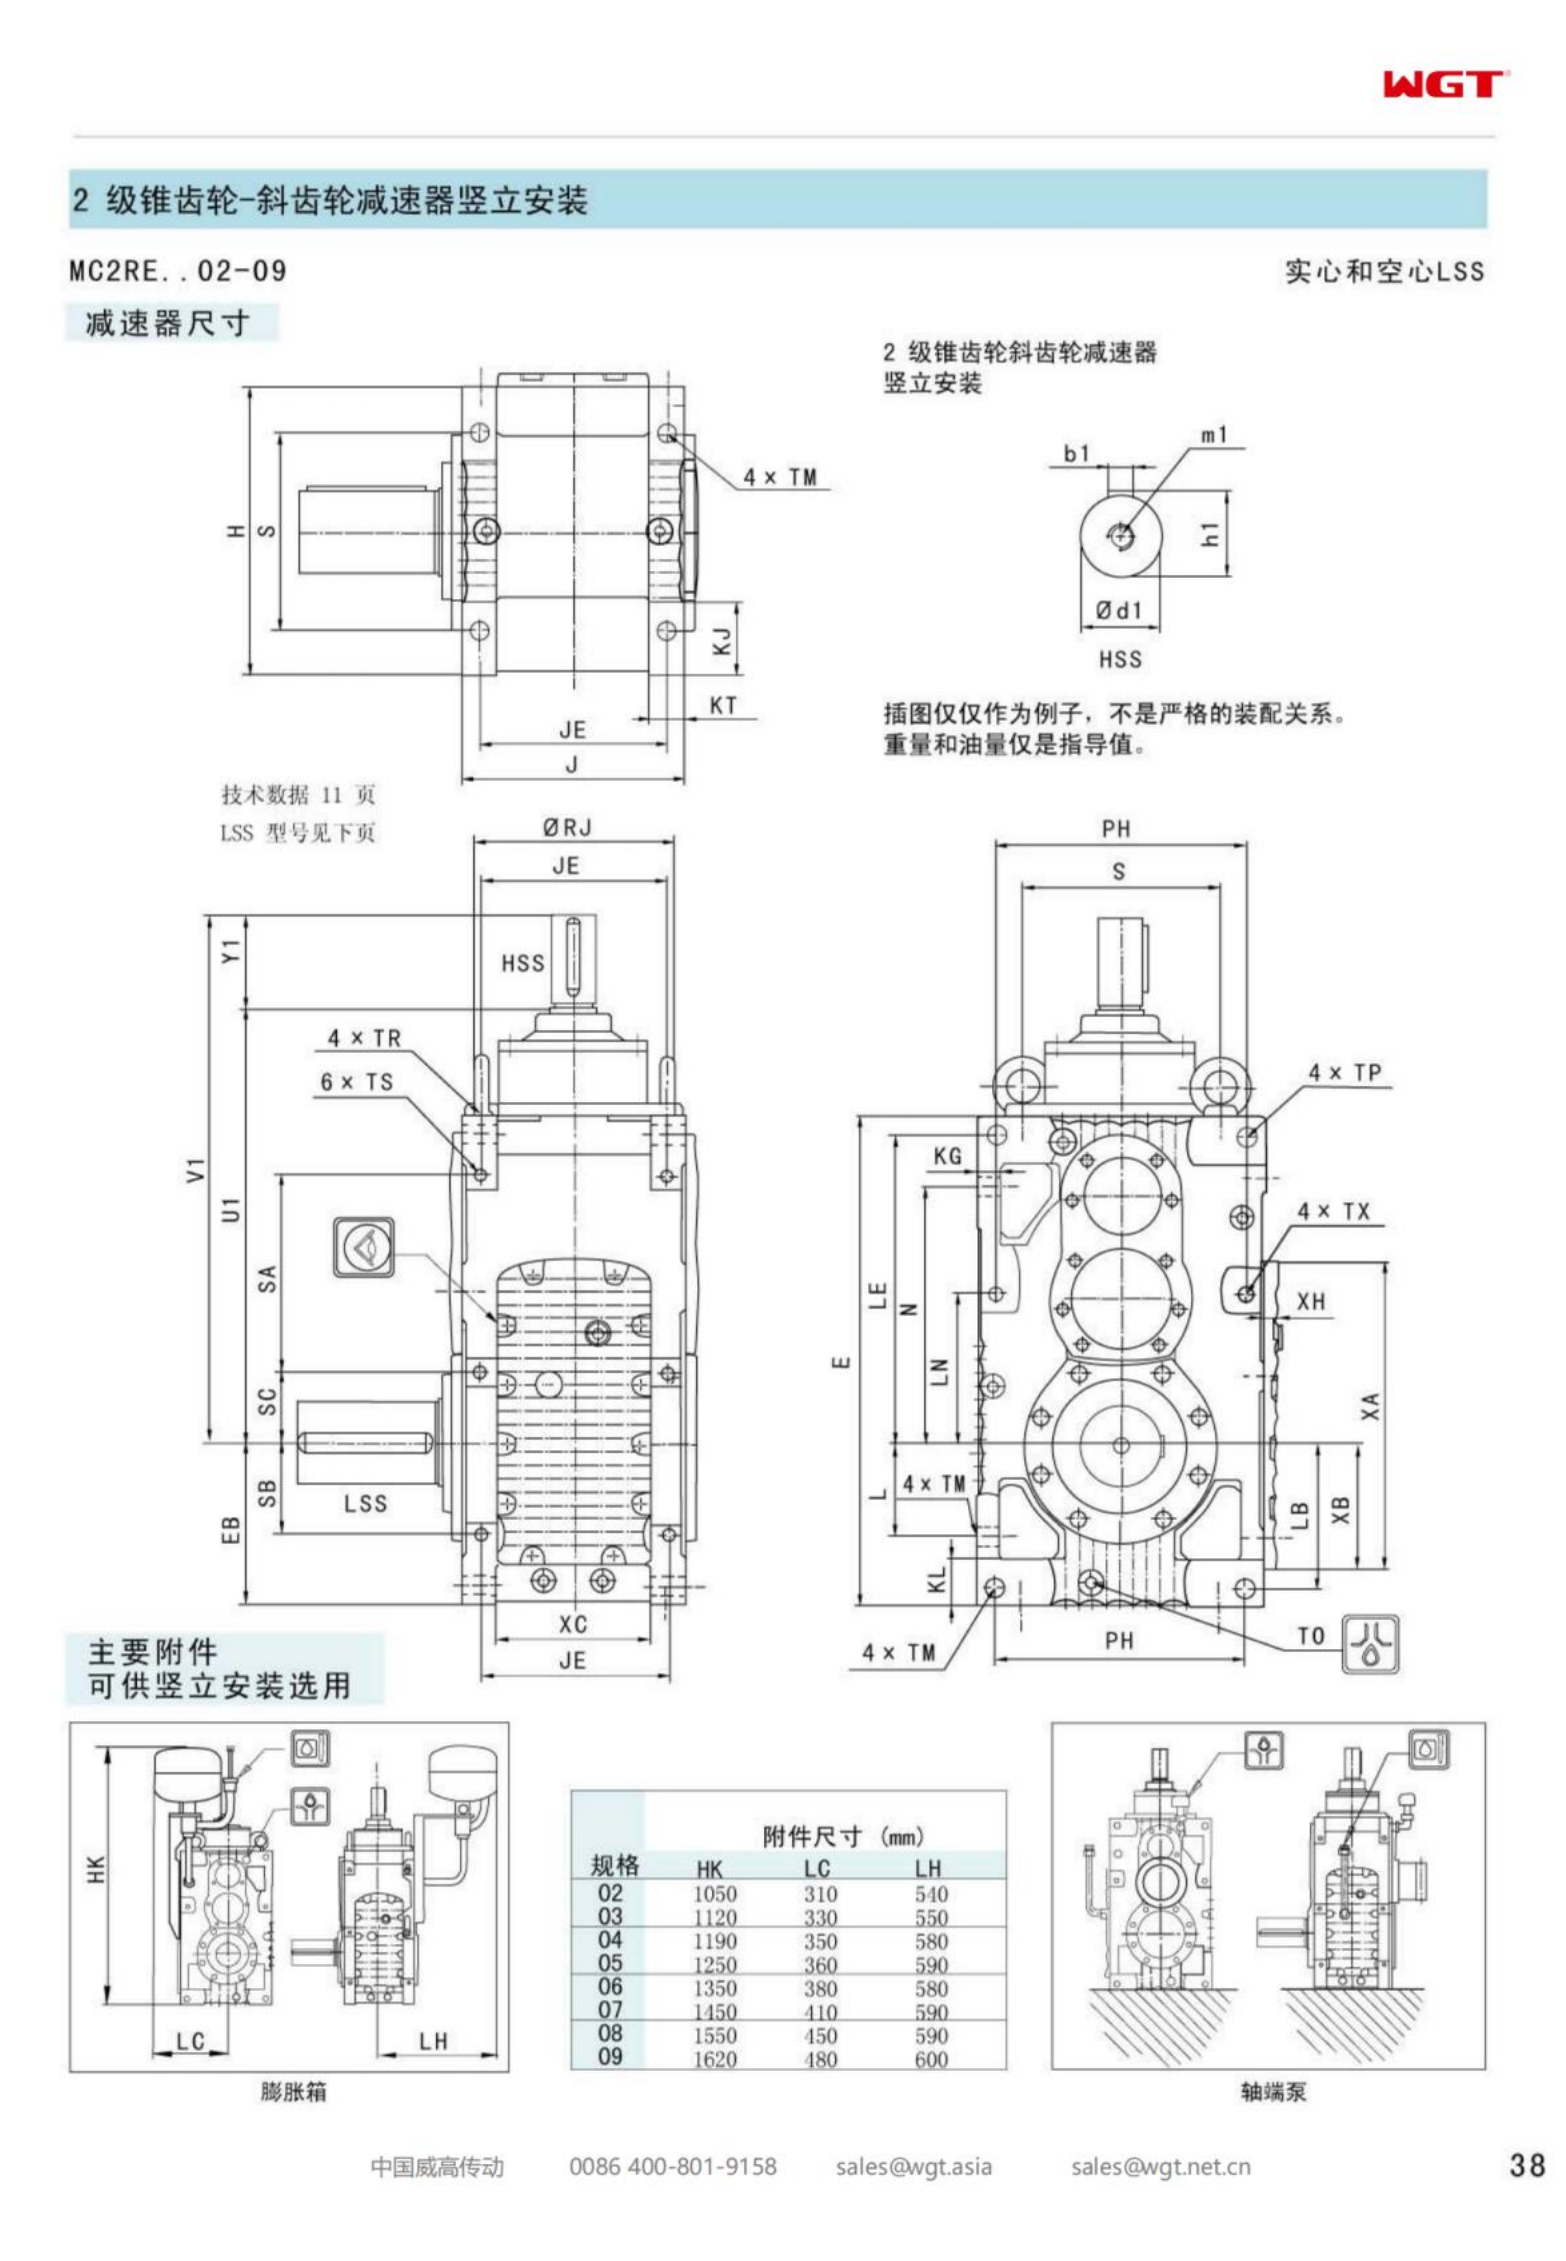 MC2RESF06 Replace_SEW_MC_Series Gearbox